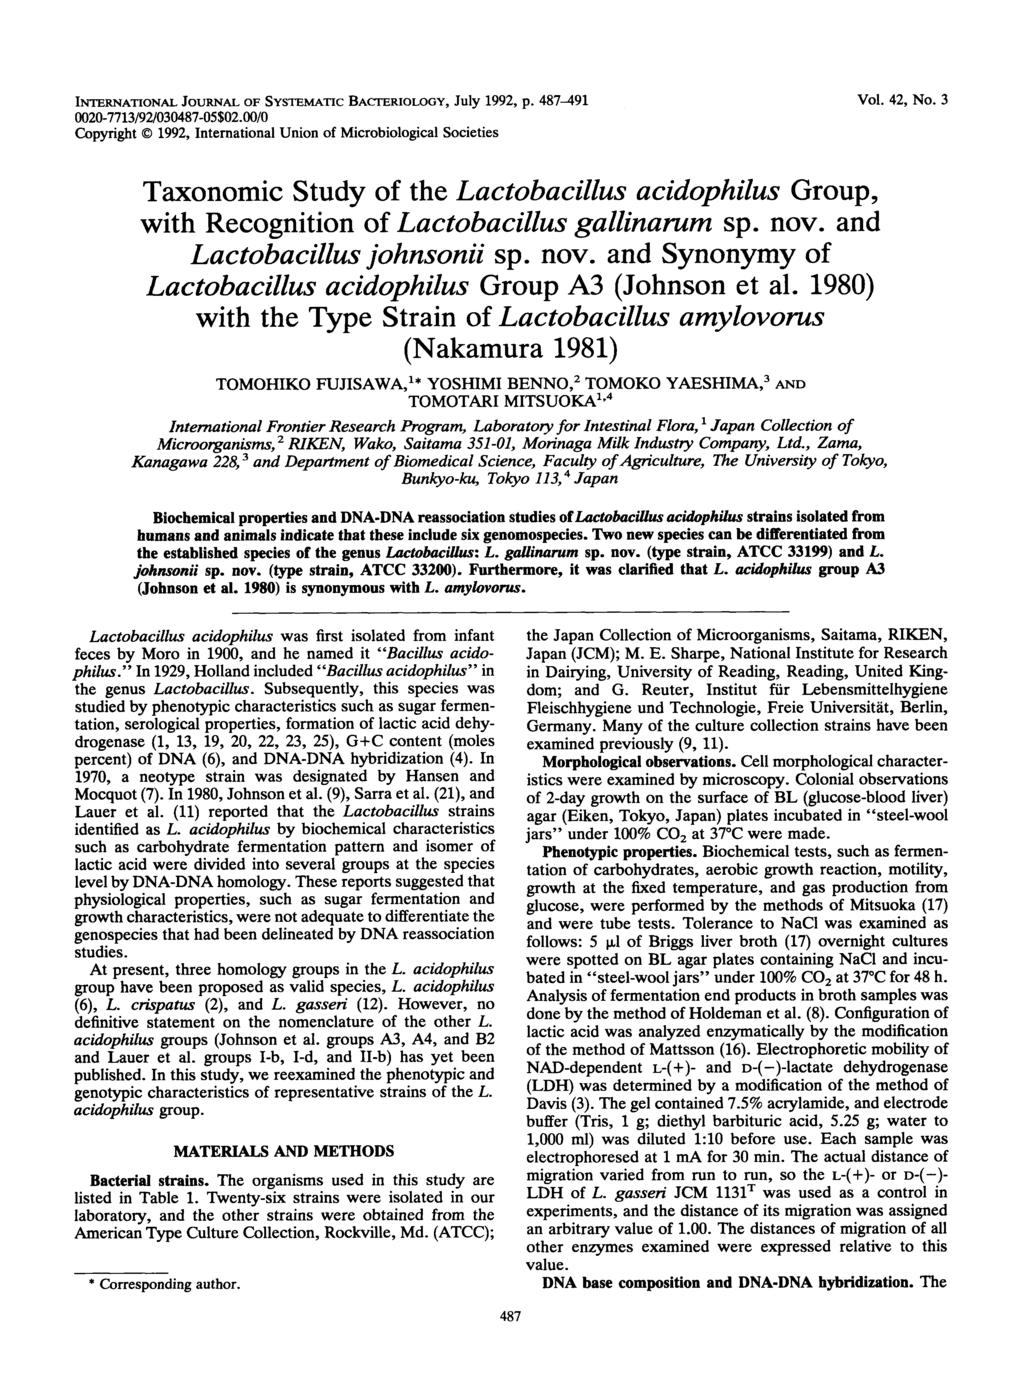 INTERNATIONAL JOURNAL OF SYSTEMATIC BACTERIOLOGY, July 1992, p. 487491 Oo27713/92/34875 $2./ Copyright 1992, International Union of Microbiological Societies Vol. 42, No.